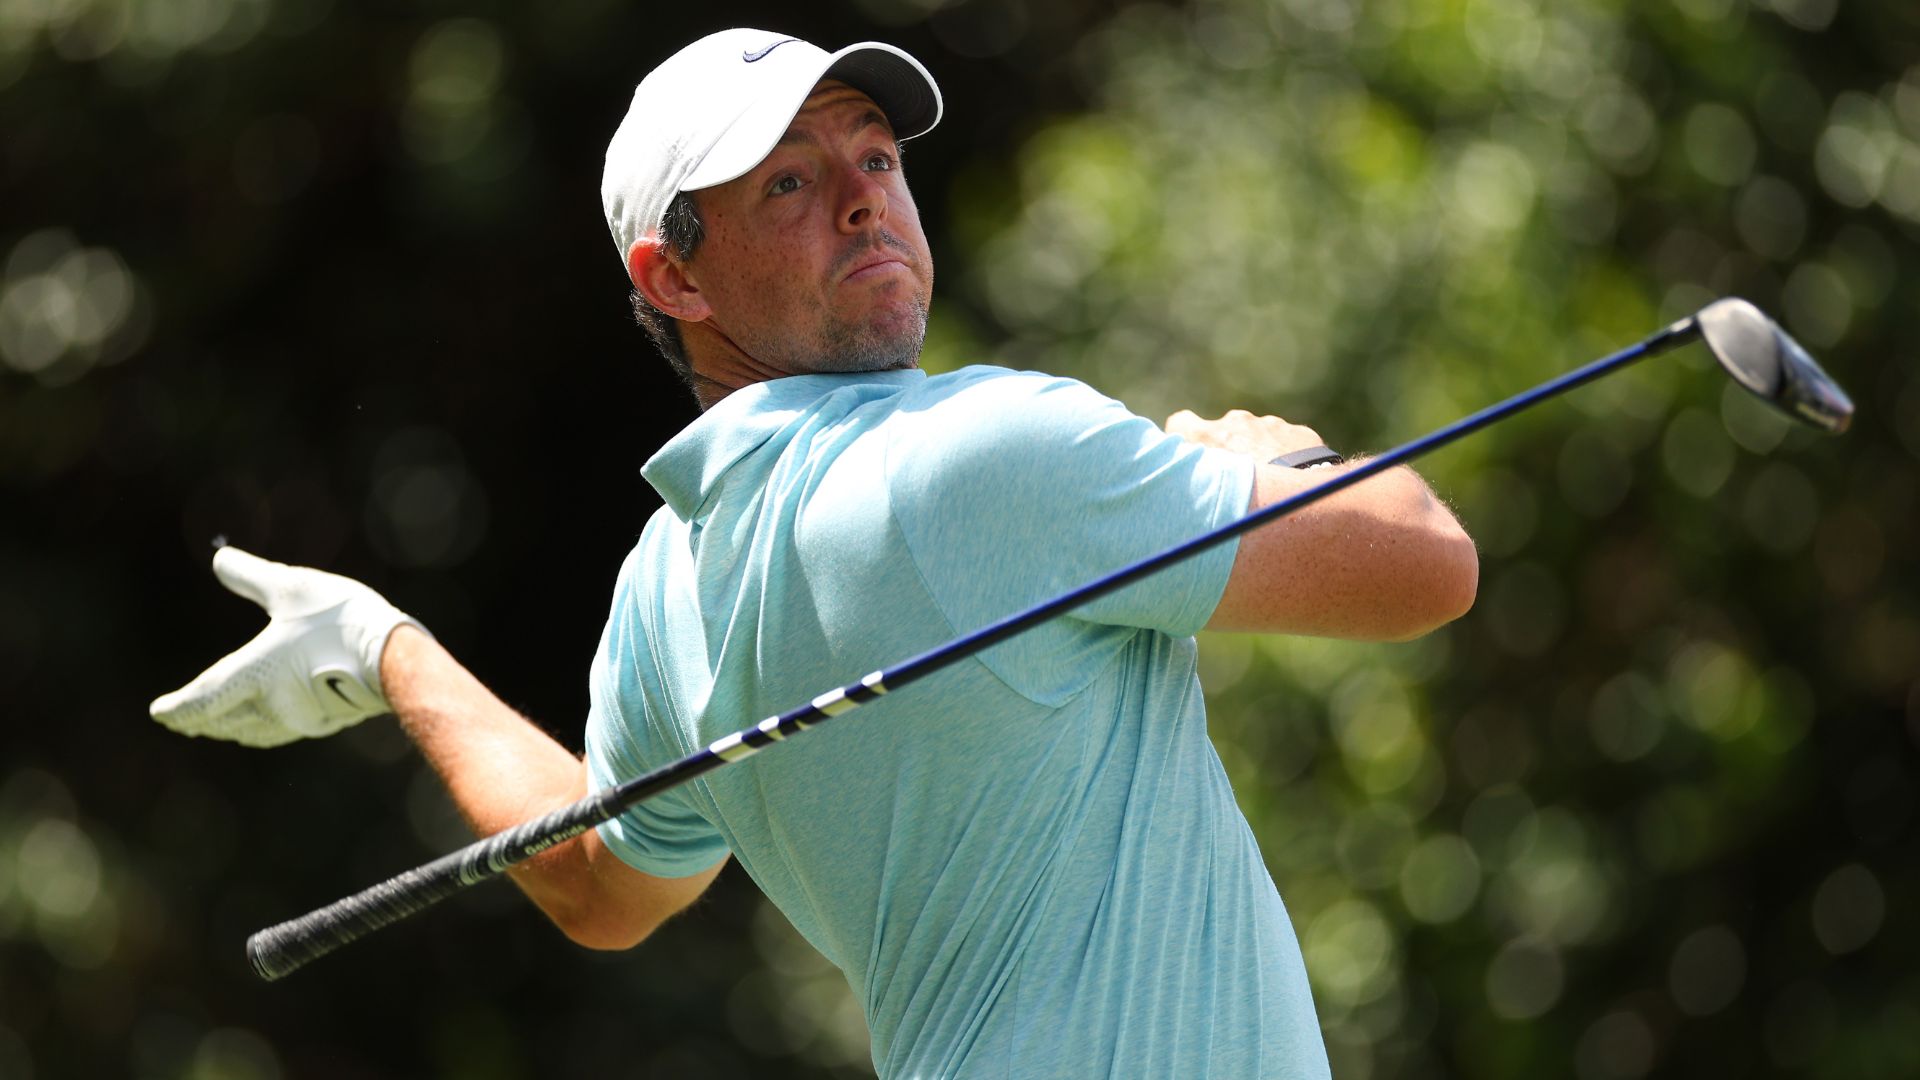 Rory McIlroy’s tough ride continues at Wells Fargo Championship heading into PGA Championship